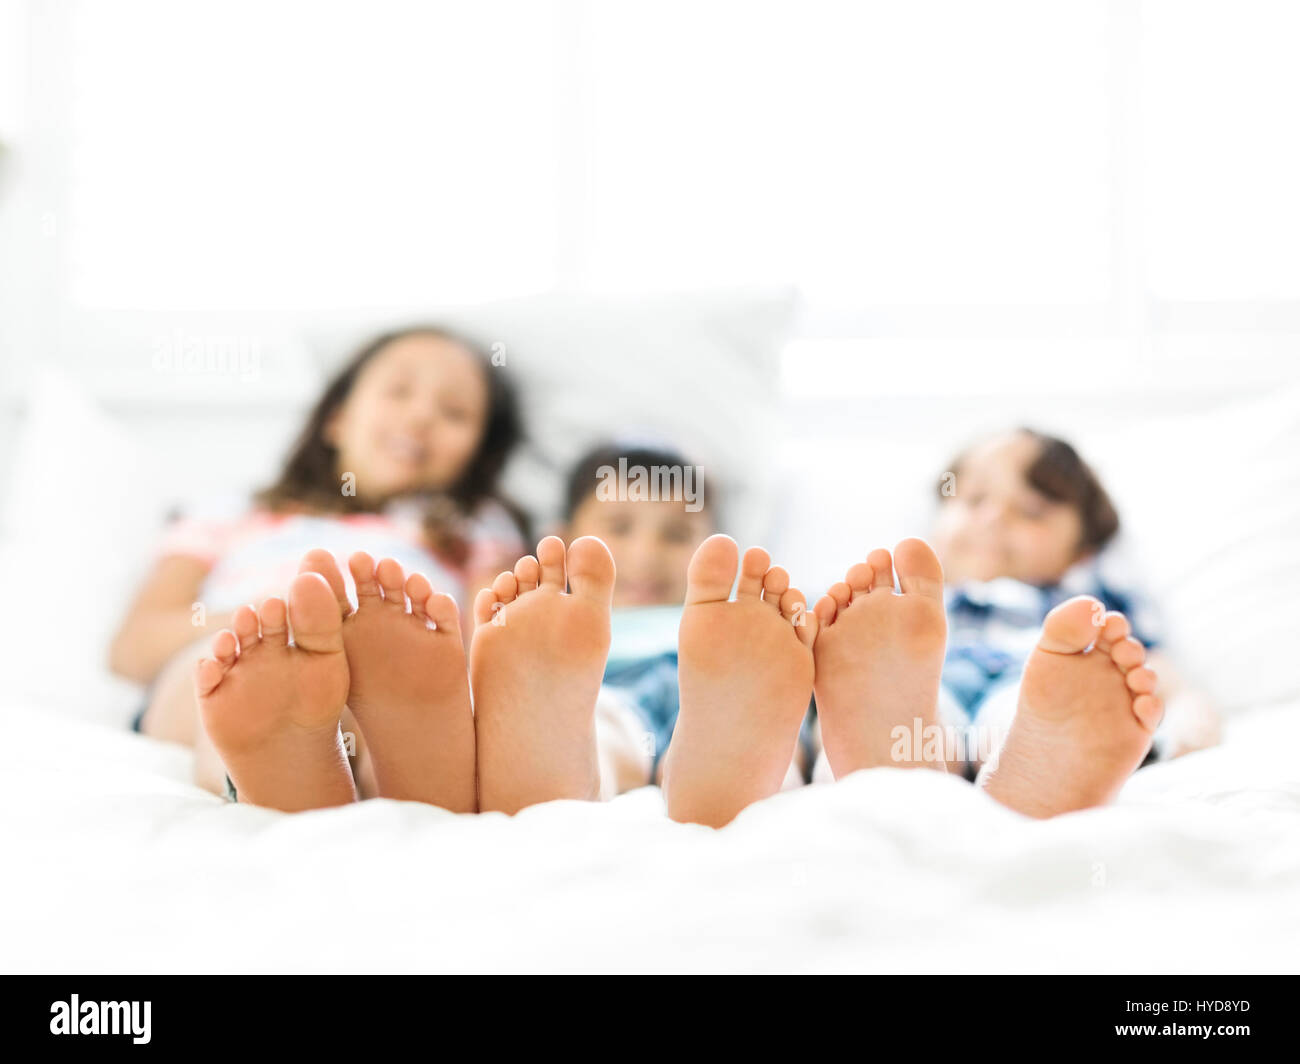 Siblings (10-11, 6-7, 8-9) lying in bed side by side Stock Photo